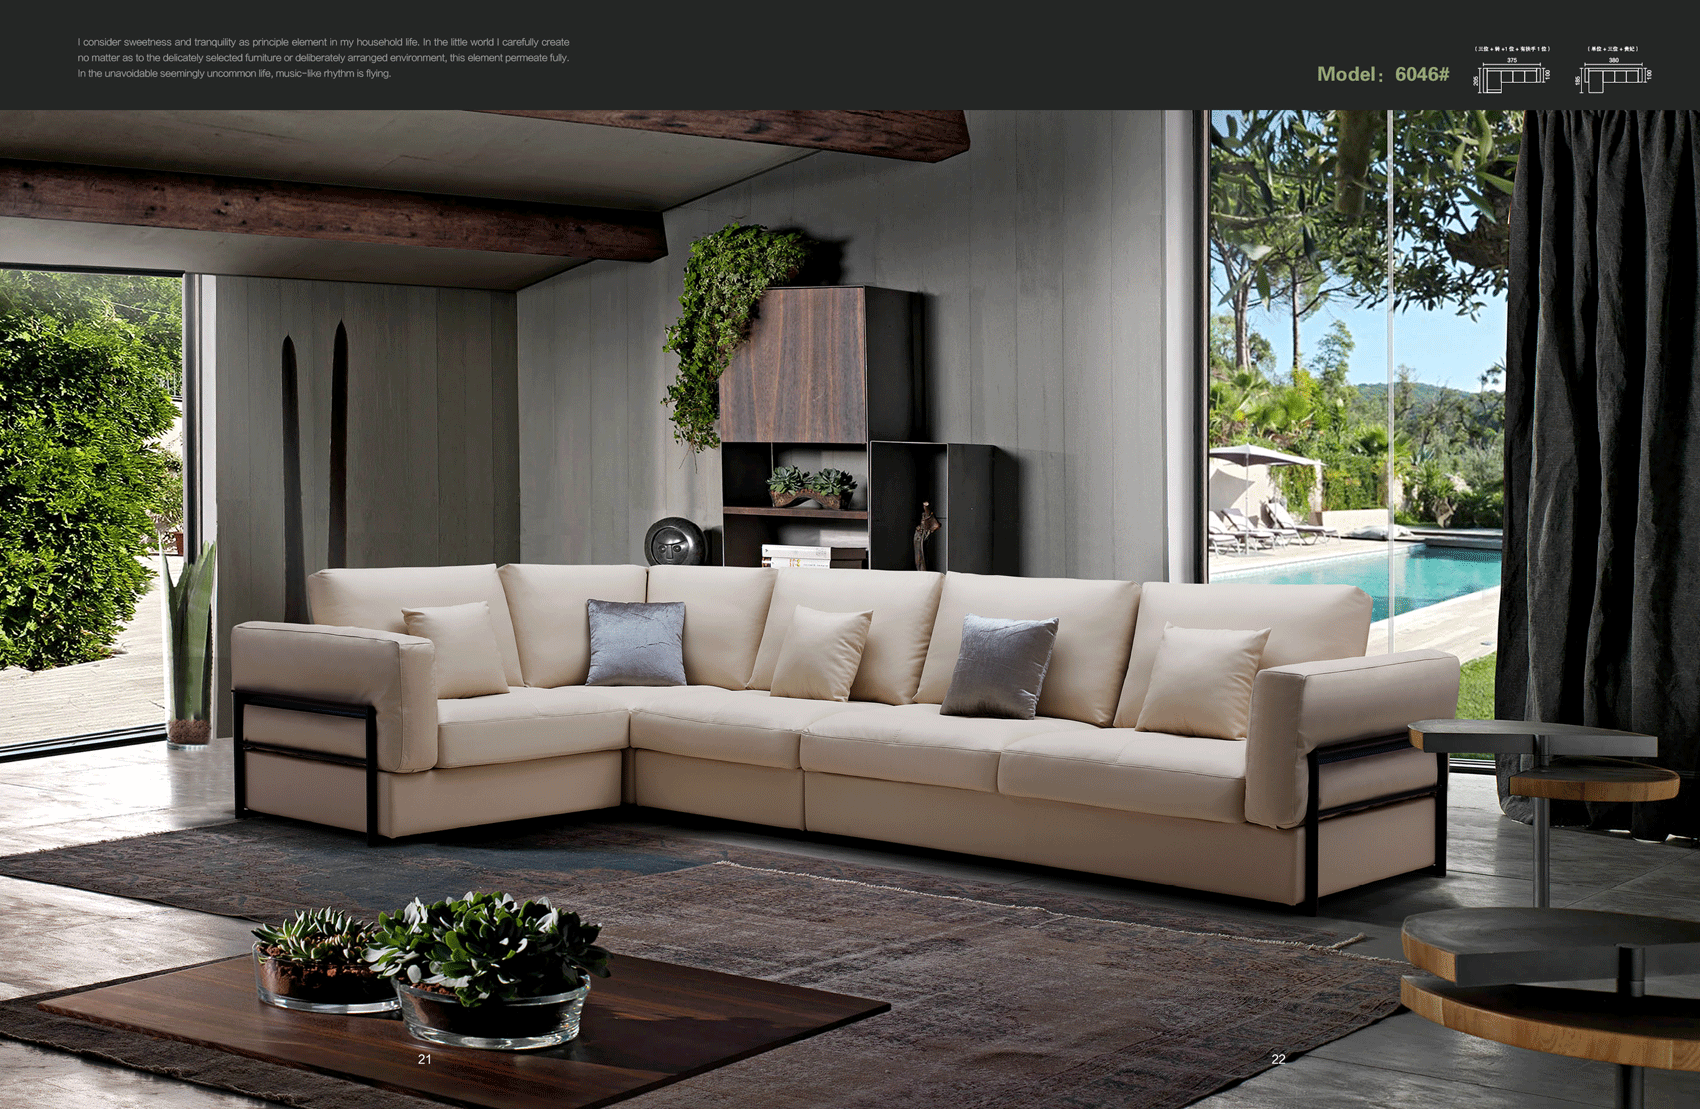 Living Room Furniture Reclining and Sliding Seats Sets 6046 Sectional